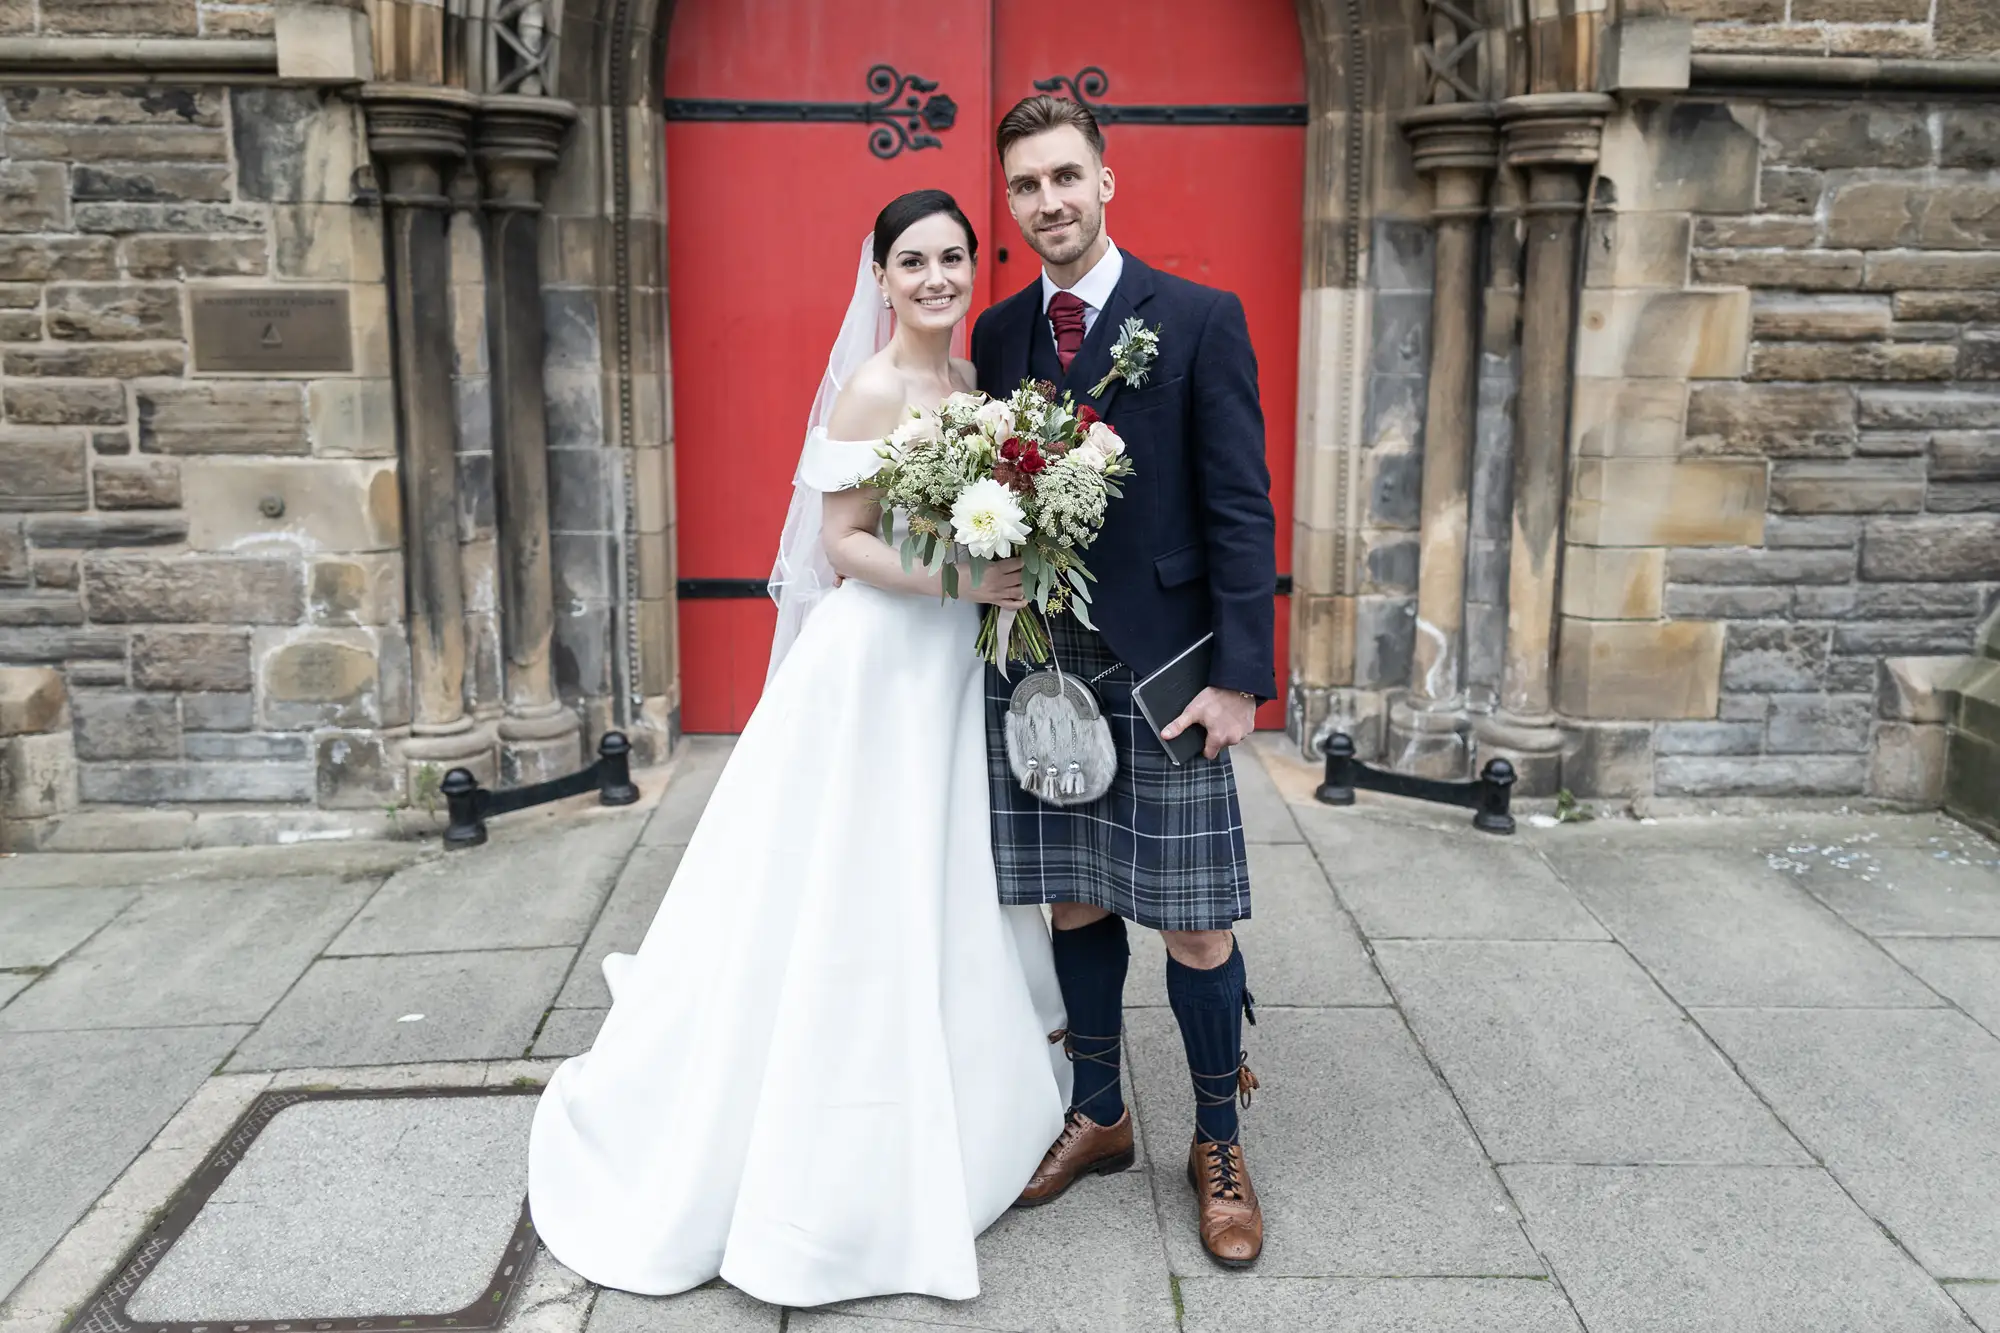 A bride in a white gown and a groom in a kilt holding a bouquet, standing in front of a red door at a stone church.